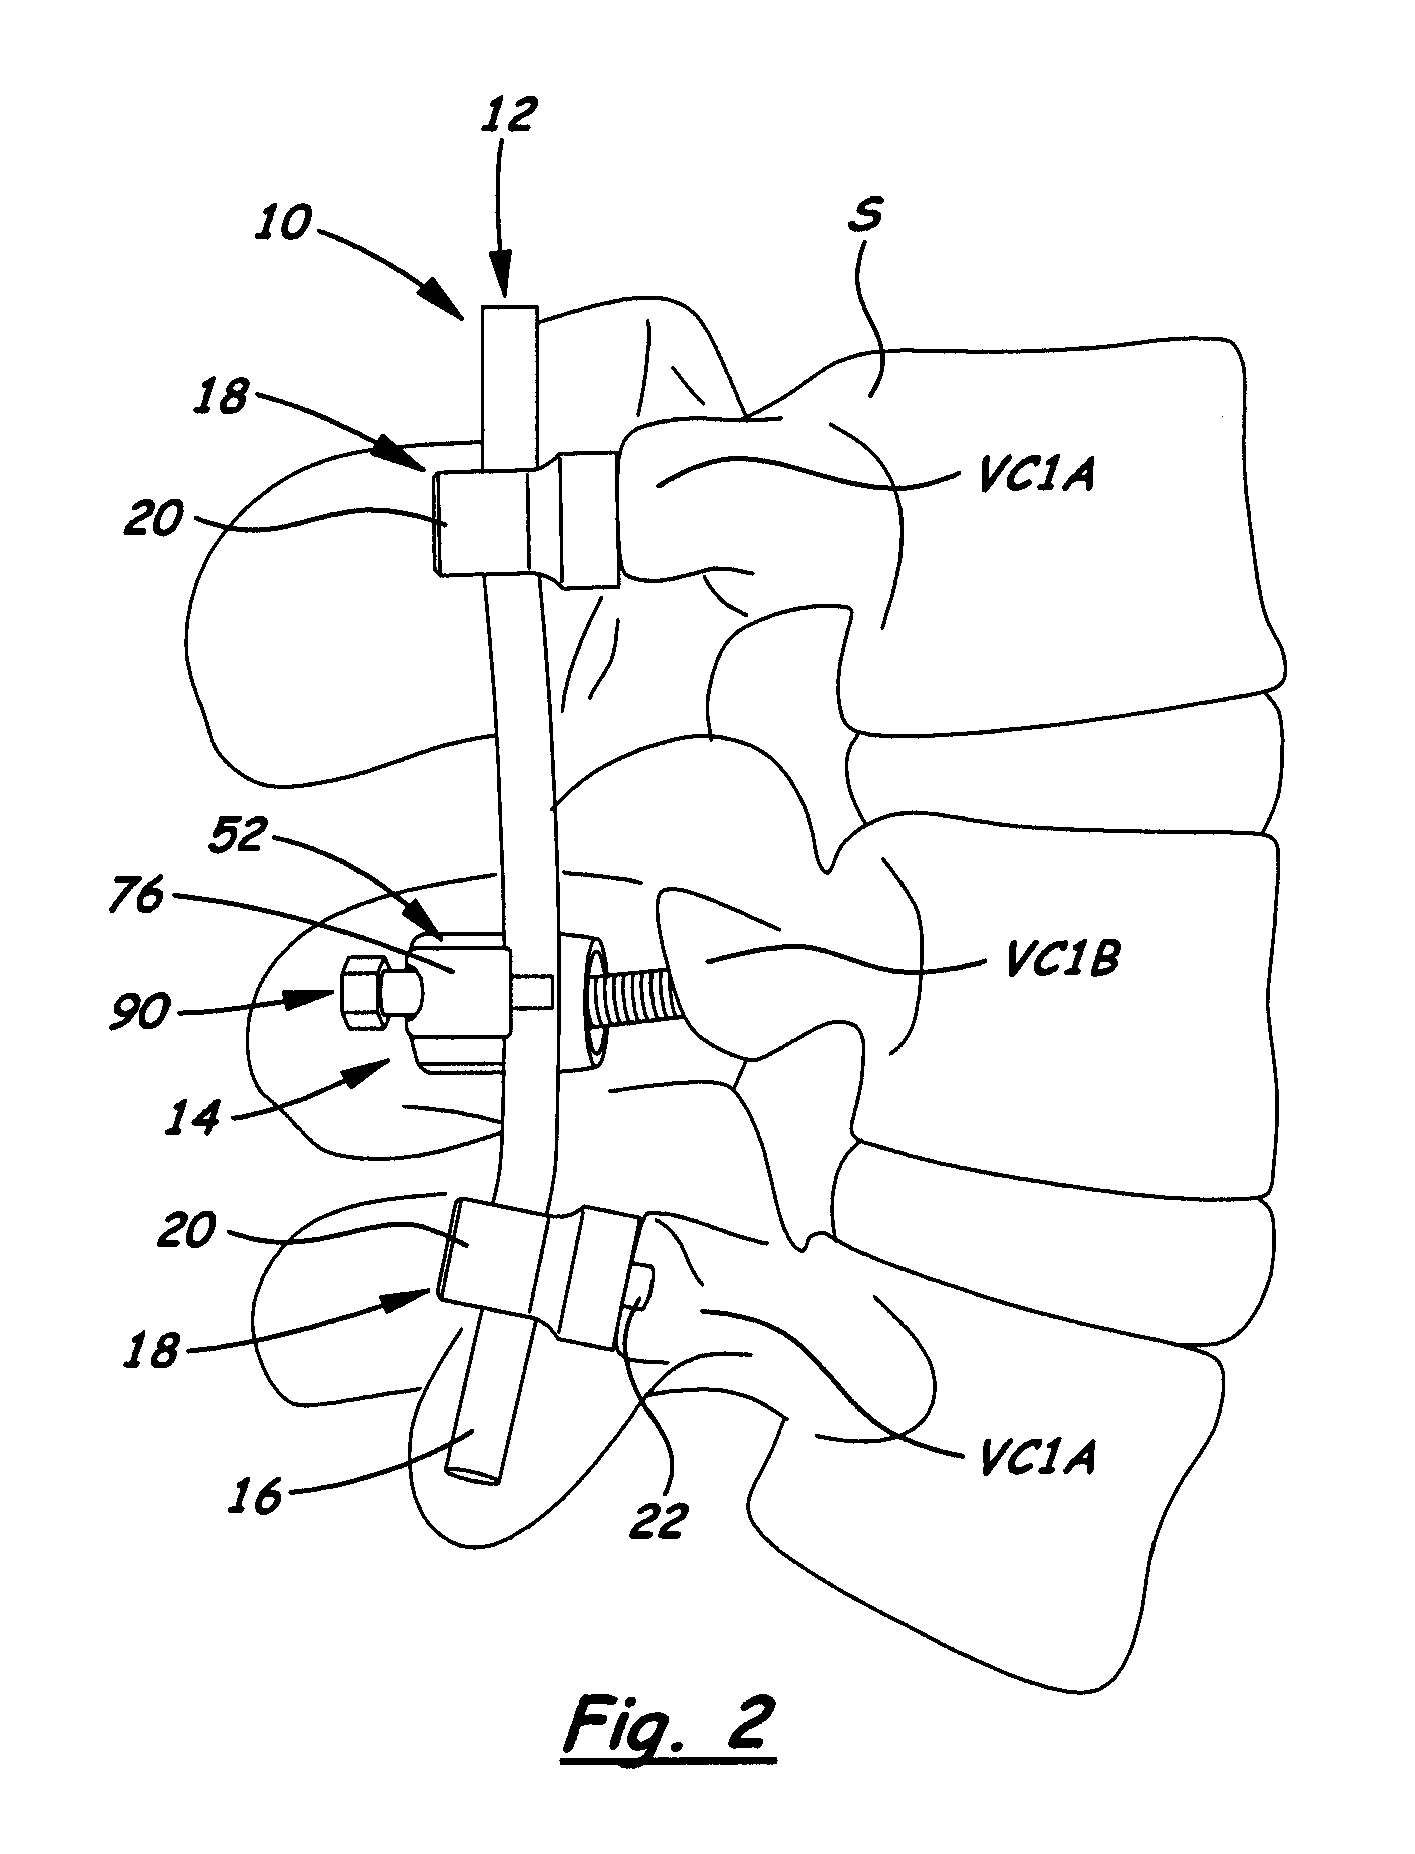 Apparatus for implementing a spinal fixation system with supplemental fixation